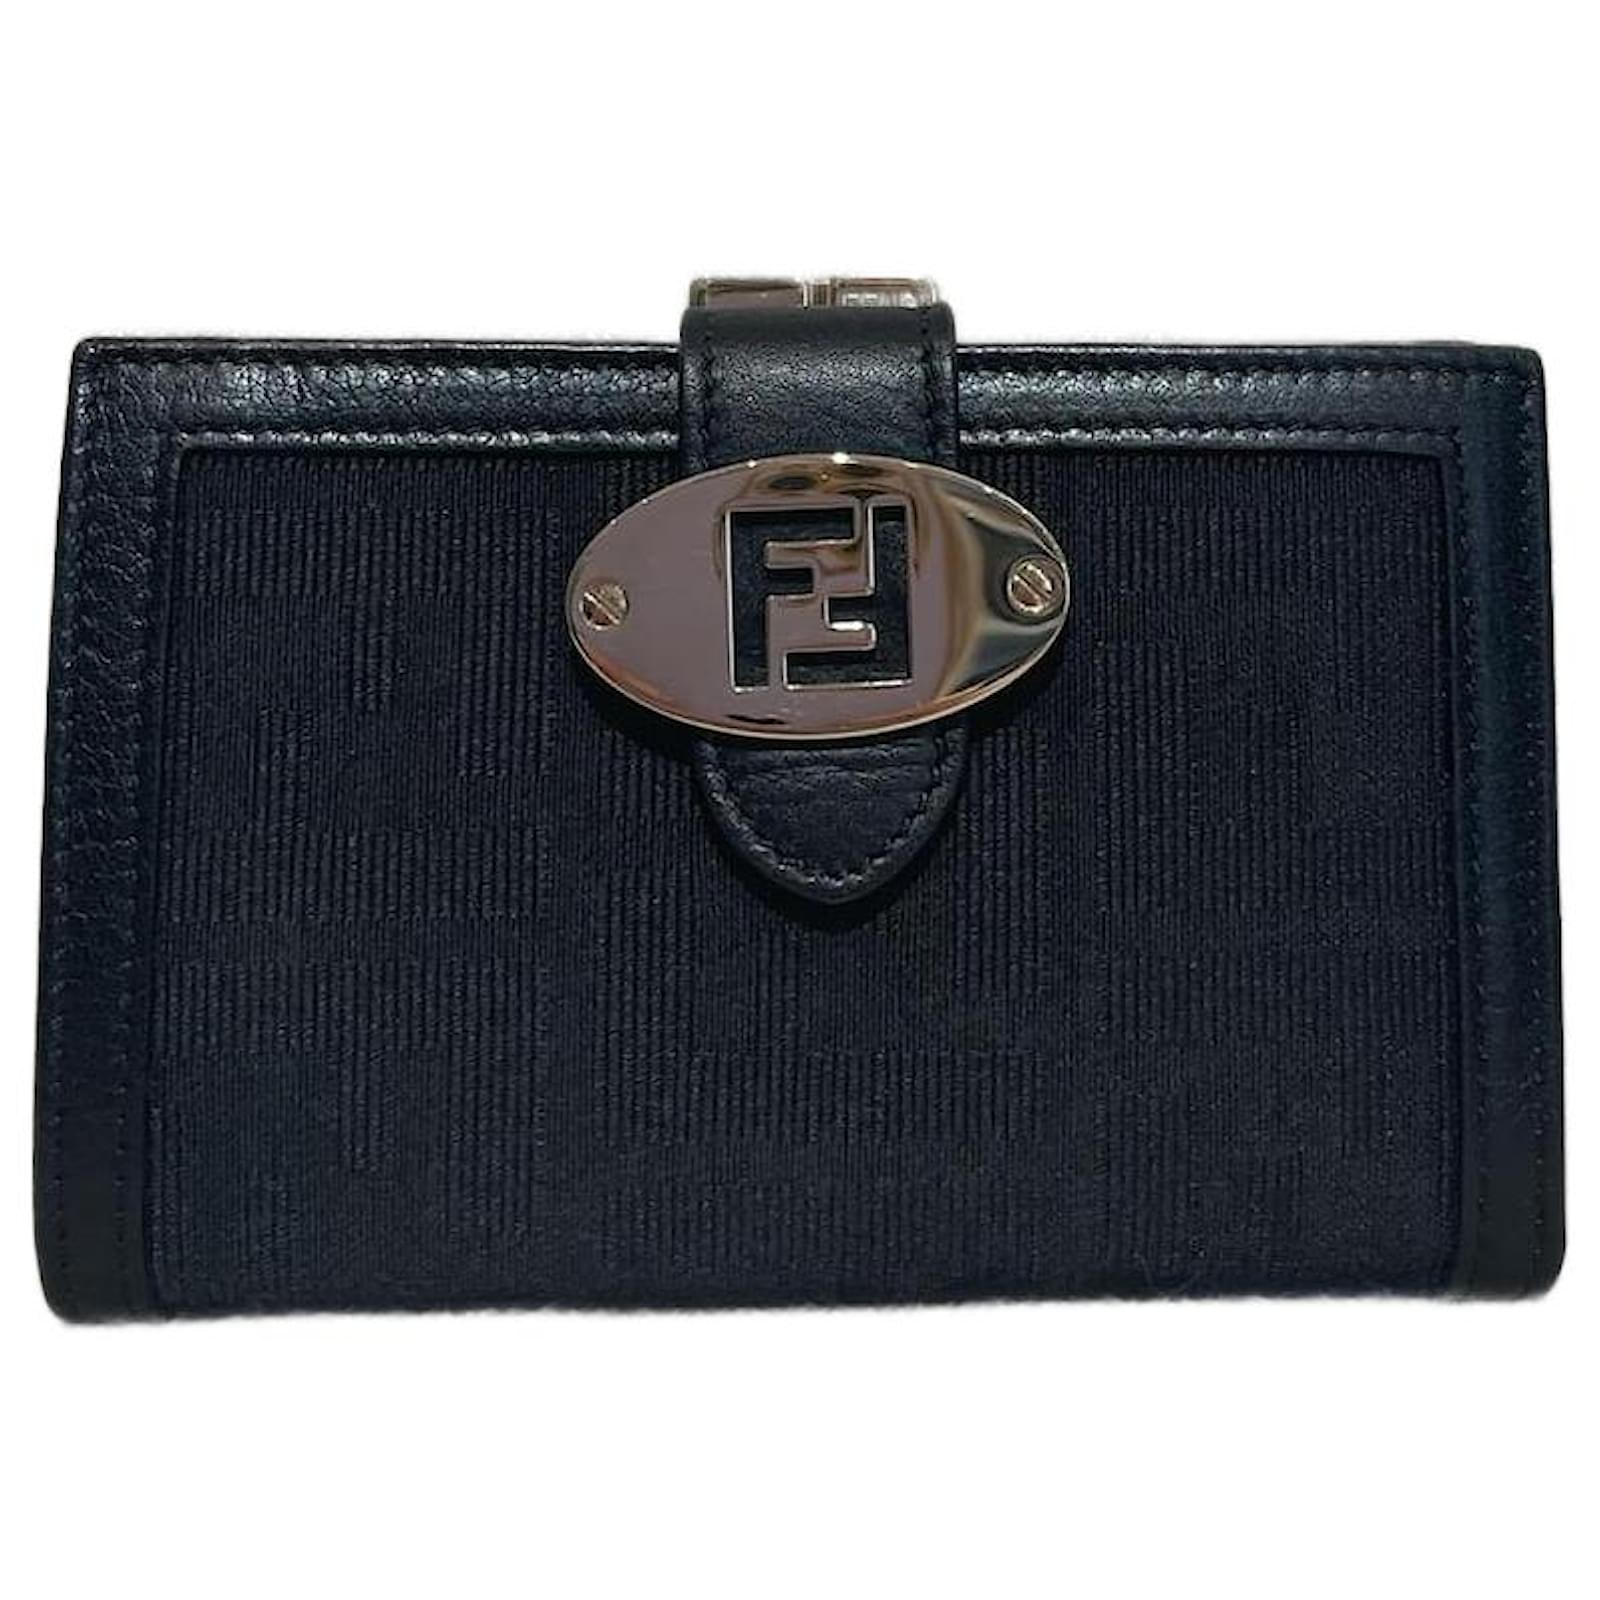 FENDI Monster Studs Leather Bugs Continental Wallet Grey